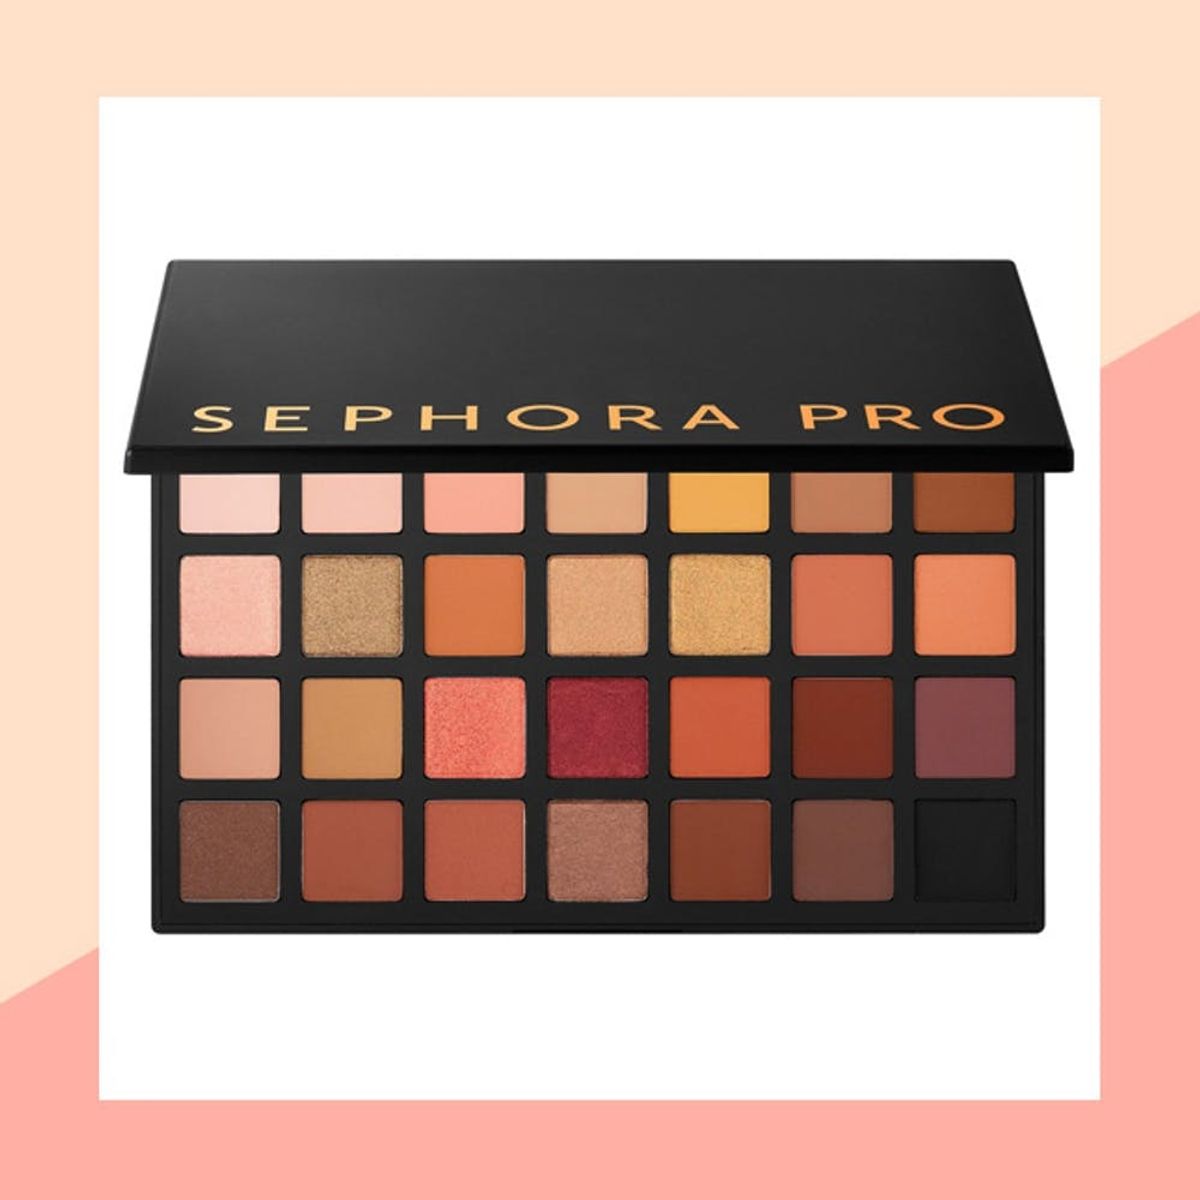 This Is the Only Palette You Need to Nail Summer’s Hottest Makeup Trends